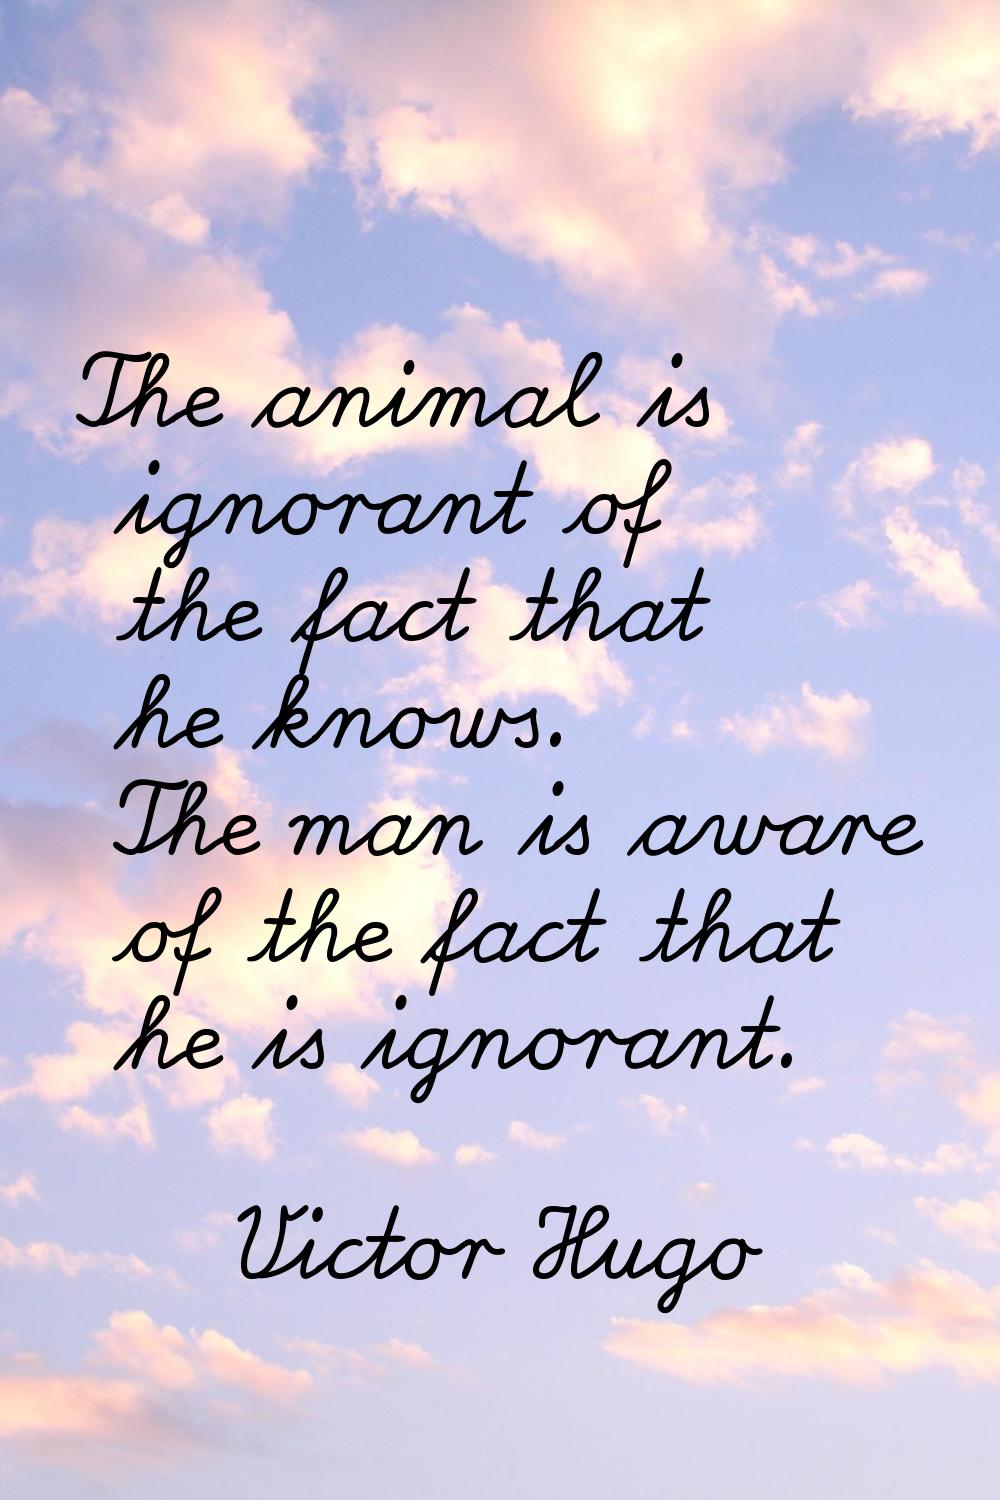 The animal is ignorant of the fact that he knows. The man is aware of the fact that he is ignorant.